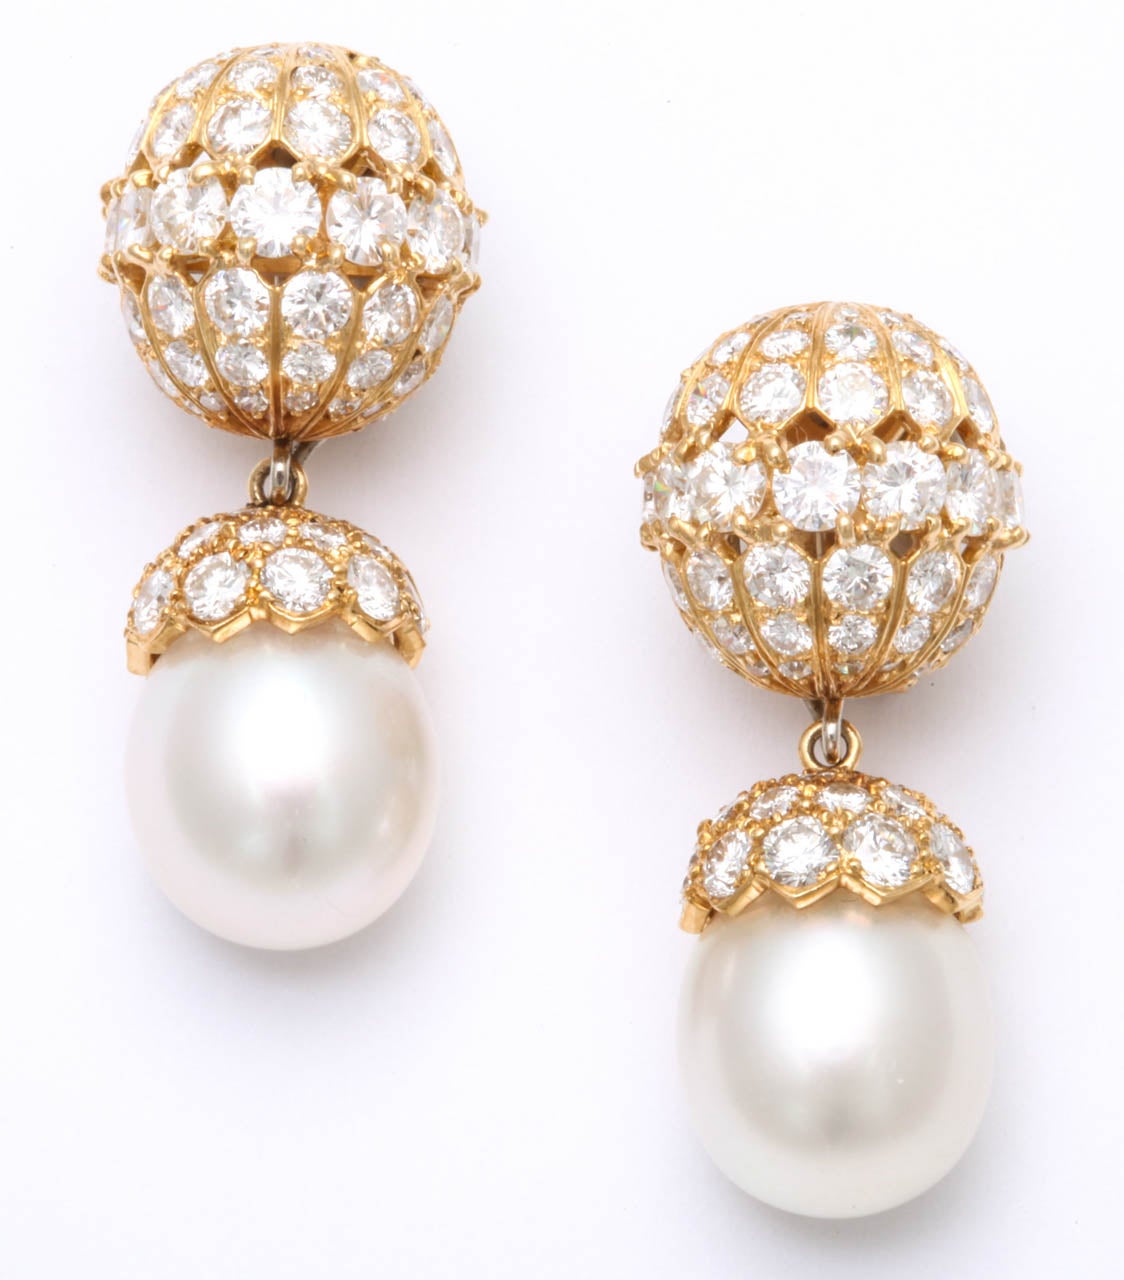 A PAIR OF DIAMOND AND CULTURED PEARL EAR PENDANTS, BY VAN CLEEF & ARPELS. 
Each suspending a detachable cultured pearl, measuring approximately 11.95 mm, with a circular-cut diamond cap, to the circular and single-cut diamond domed surmount,